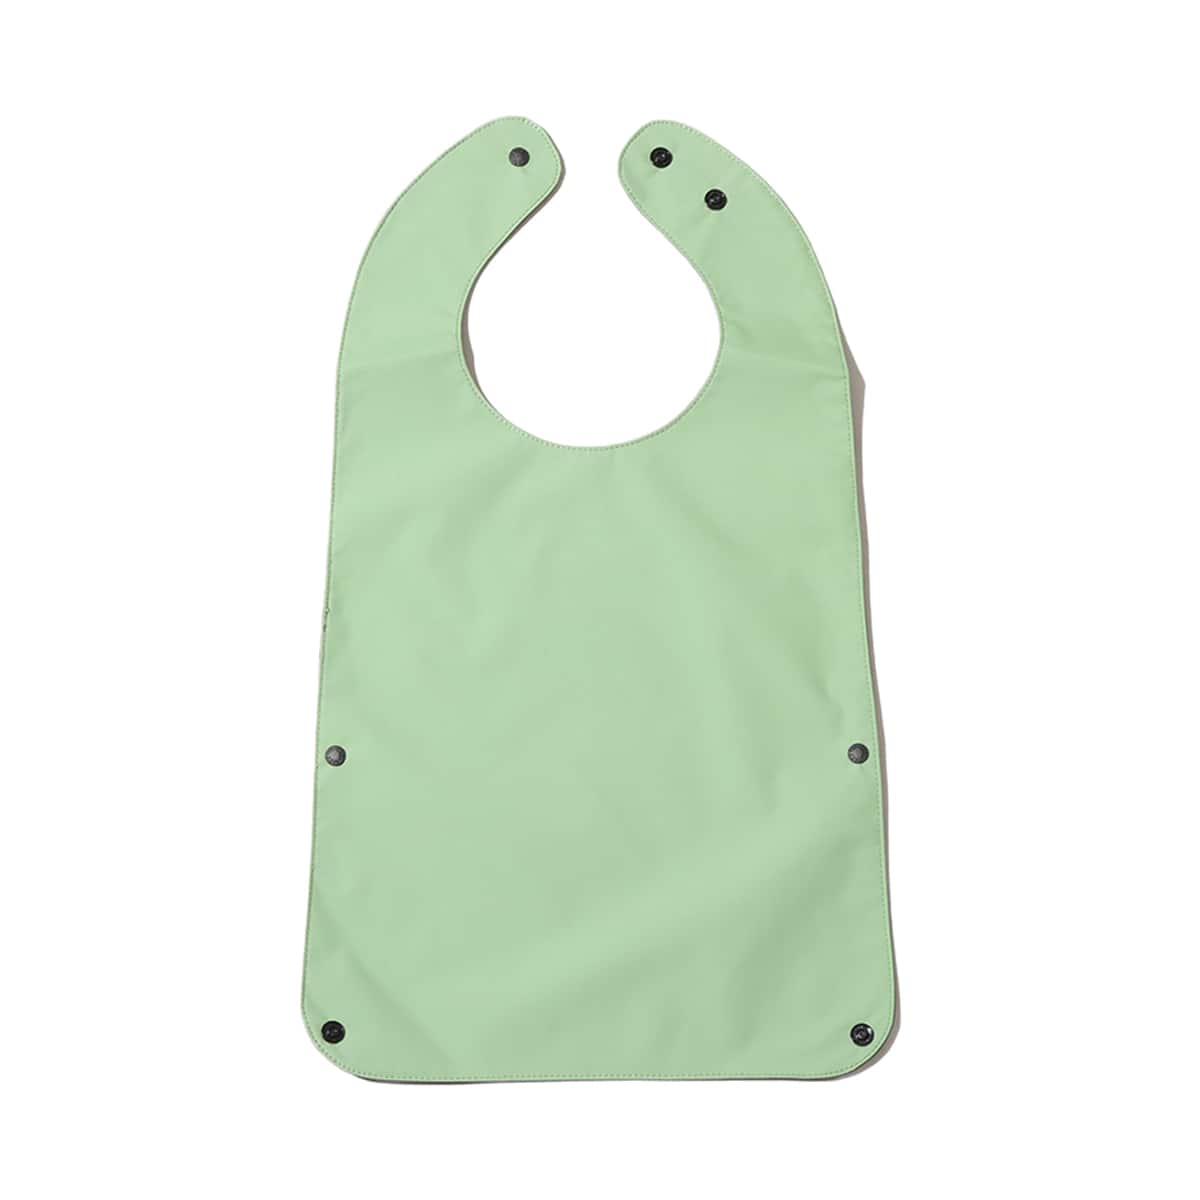 "THE NORTH FACE Baby Compact Yummy Bib"